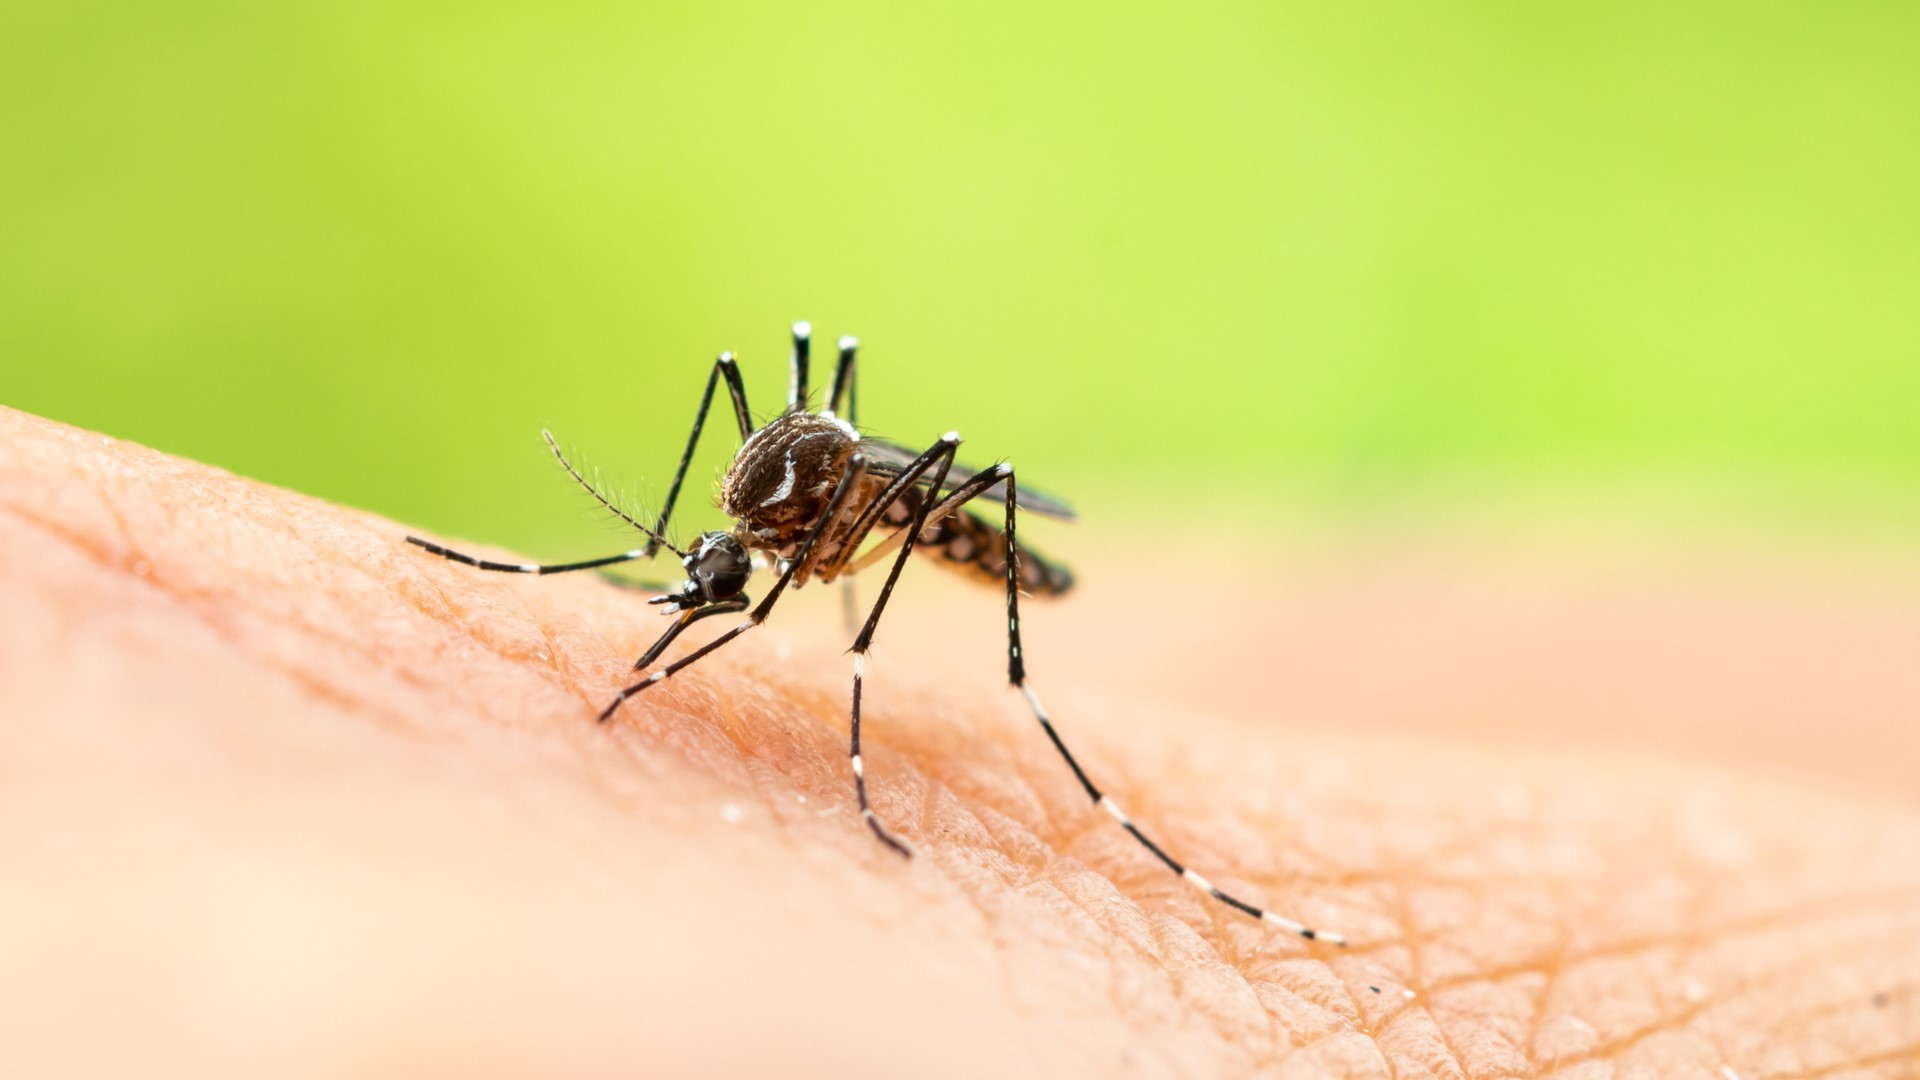 Our VERIFY team learned there's no data to suggest mosquitoes and ticks can transmit the coronavirus. It's unclear if you can get the virus twice.